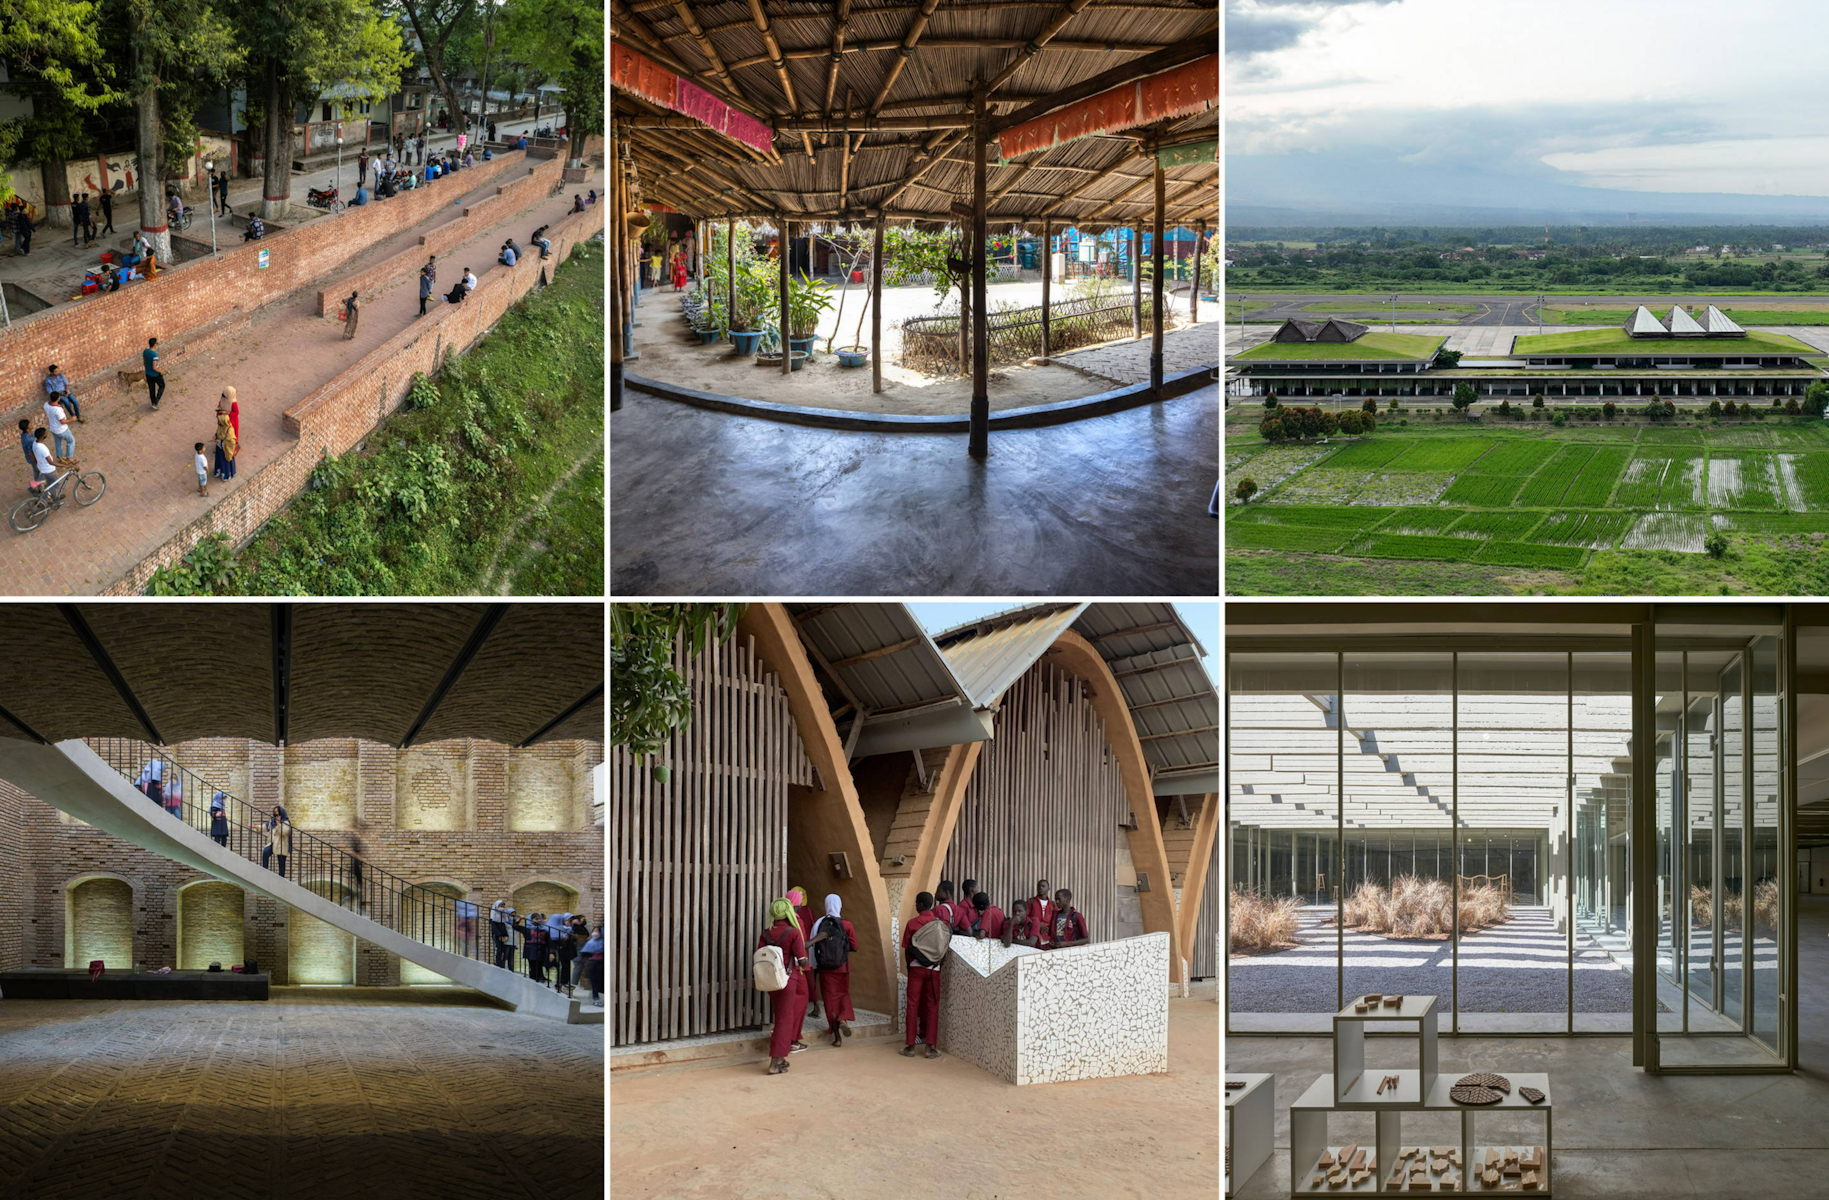 Winners of the Aga Khan Award for Architecture 2020-2022 Cycle